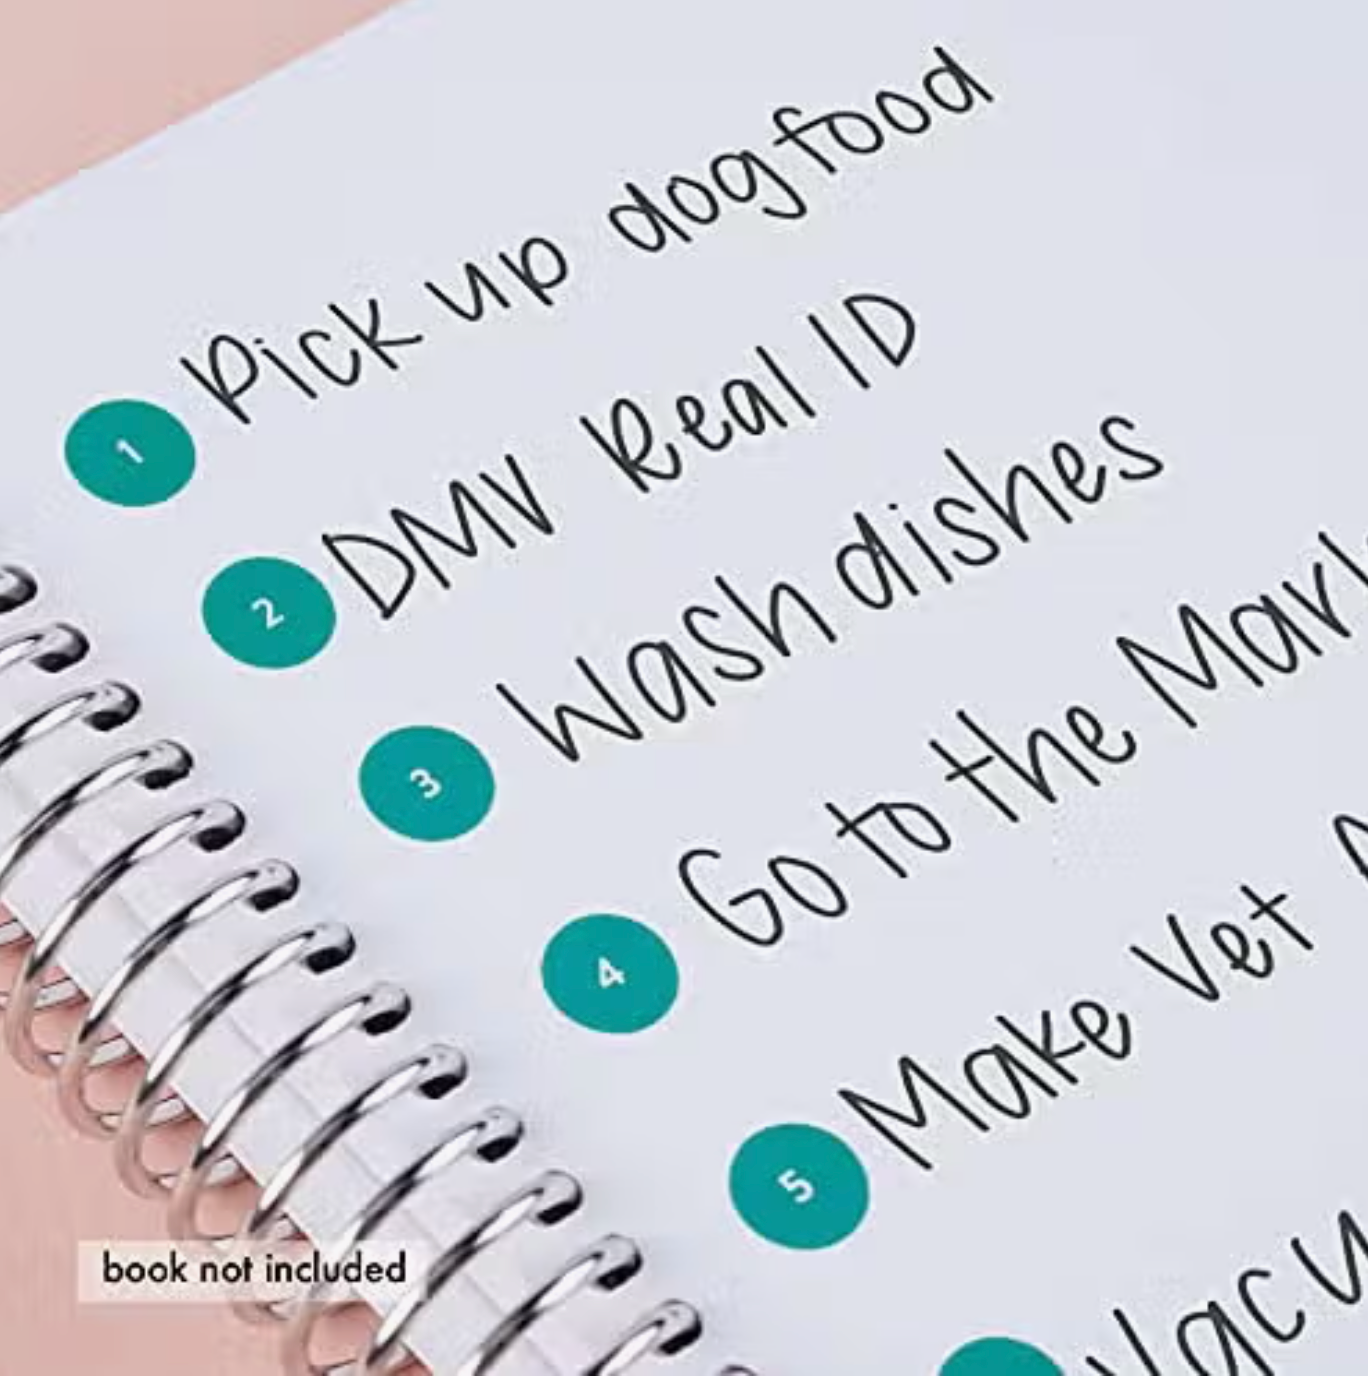 Keep track of your dates with our Date Dots Planner Sticker Pack. This pack includes a variety of circular stickers with date numbers, ideal for adding a functional and decorative element to your planner spreads. These stickers from Erin Condren are sold at BBB Supplies Craft Shop.